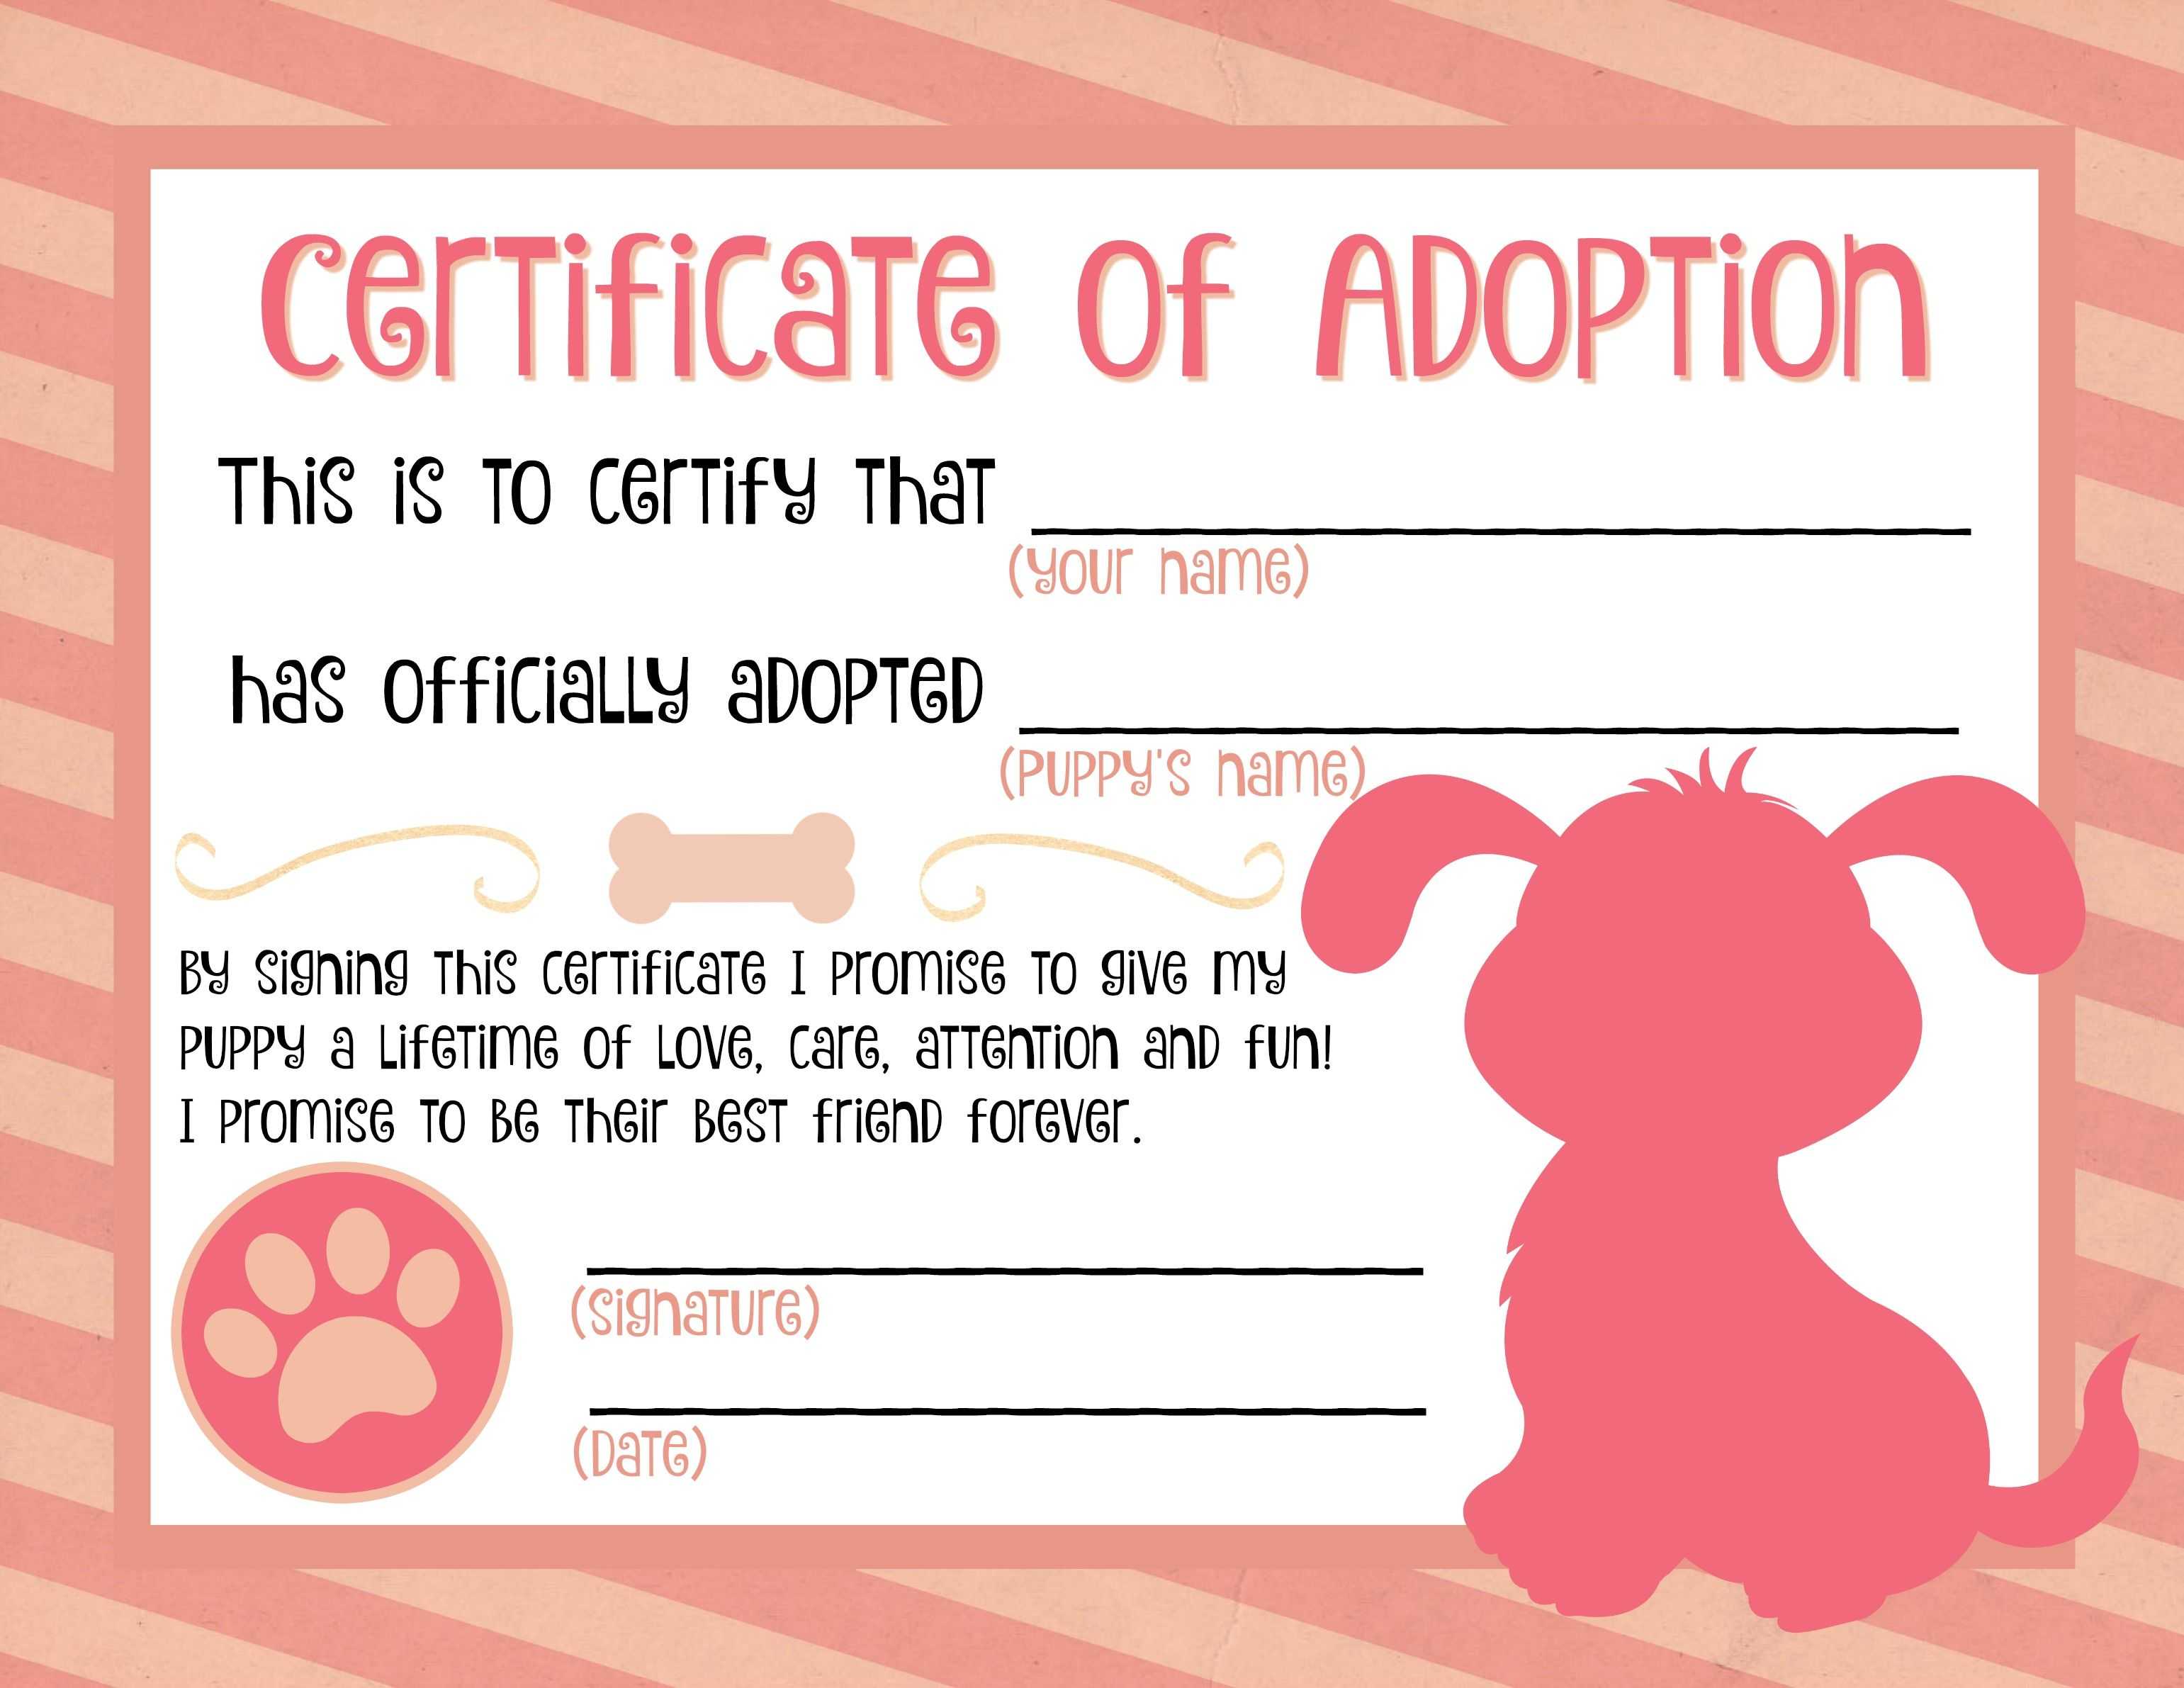 Puppy Adoption Certificate … | Party Ideas In 2019 | Puppy In Toy Adoption Certificate Template